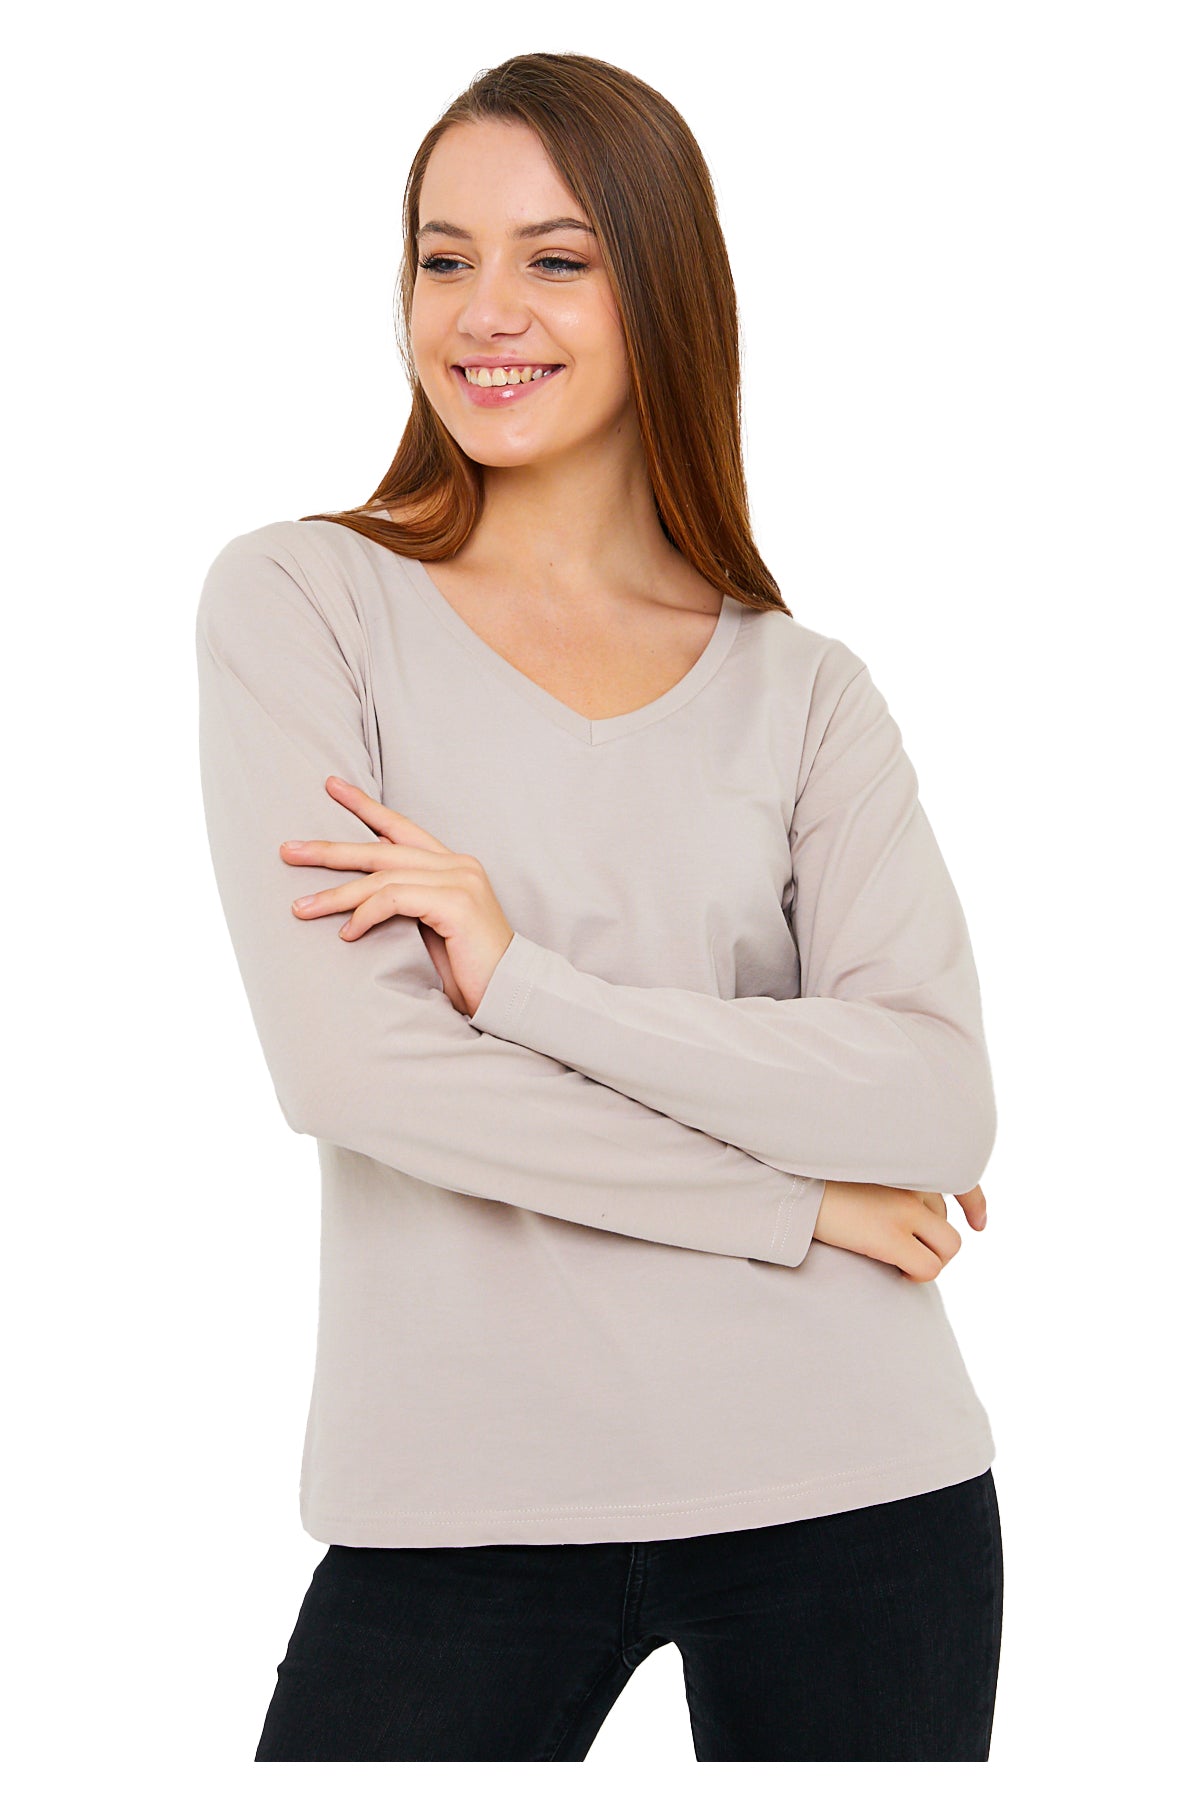 Long Sleeve V Neck T-Shirts for Women & Girls - Colorful Pima Cotton-145